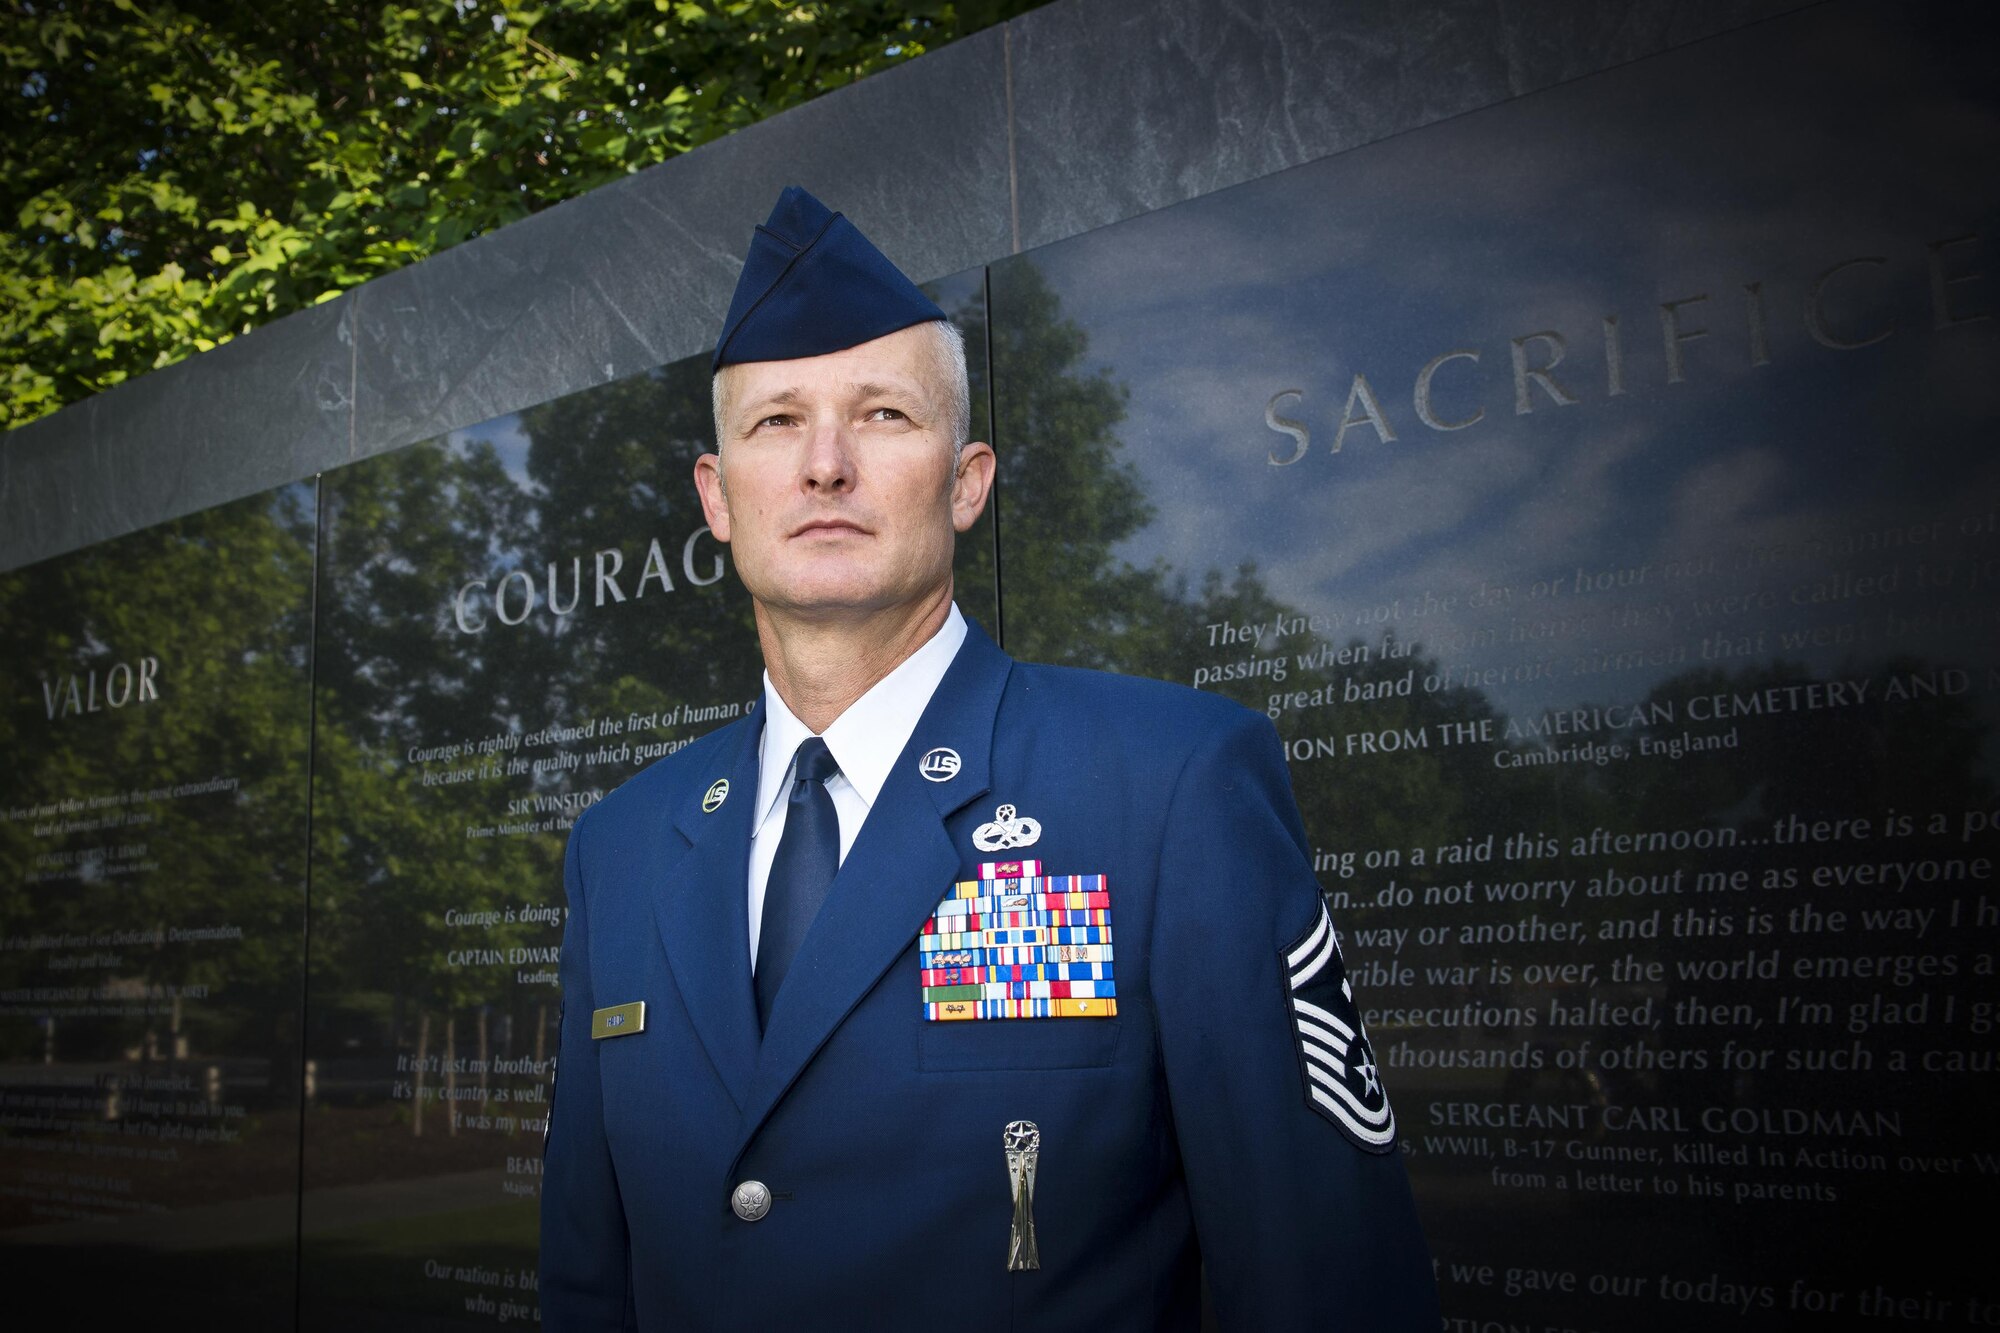 Senior Master Sgt. Jason Handa, the Air National Guard's 2016 Outstanding First Sergeant of the Year, poses for a photo at the Air Force Memorial in Washington D.C. May 31, 2017. Handa is assigned to the 162nd Wing, Arizona Air National Guard, and was chosen for the honor among all first sergeants across the Air National Guard.